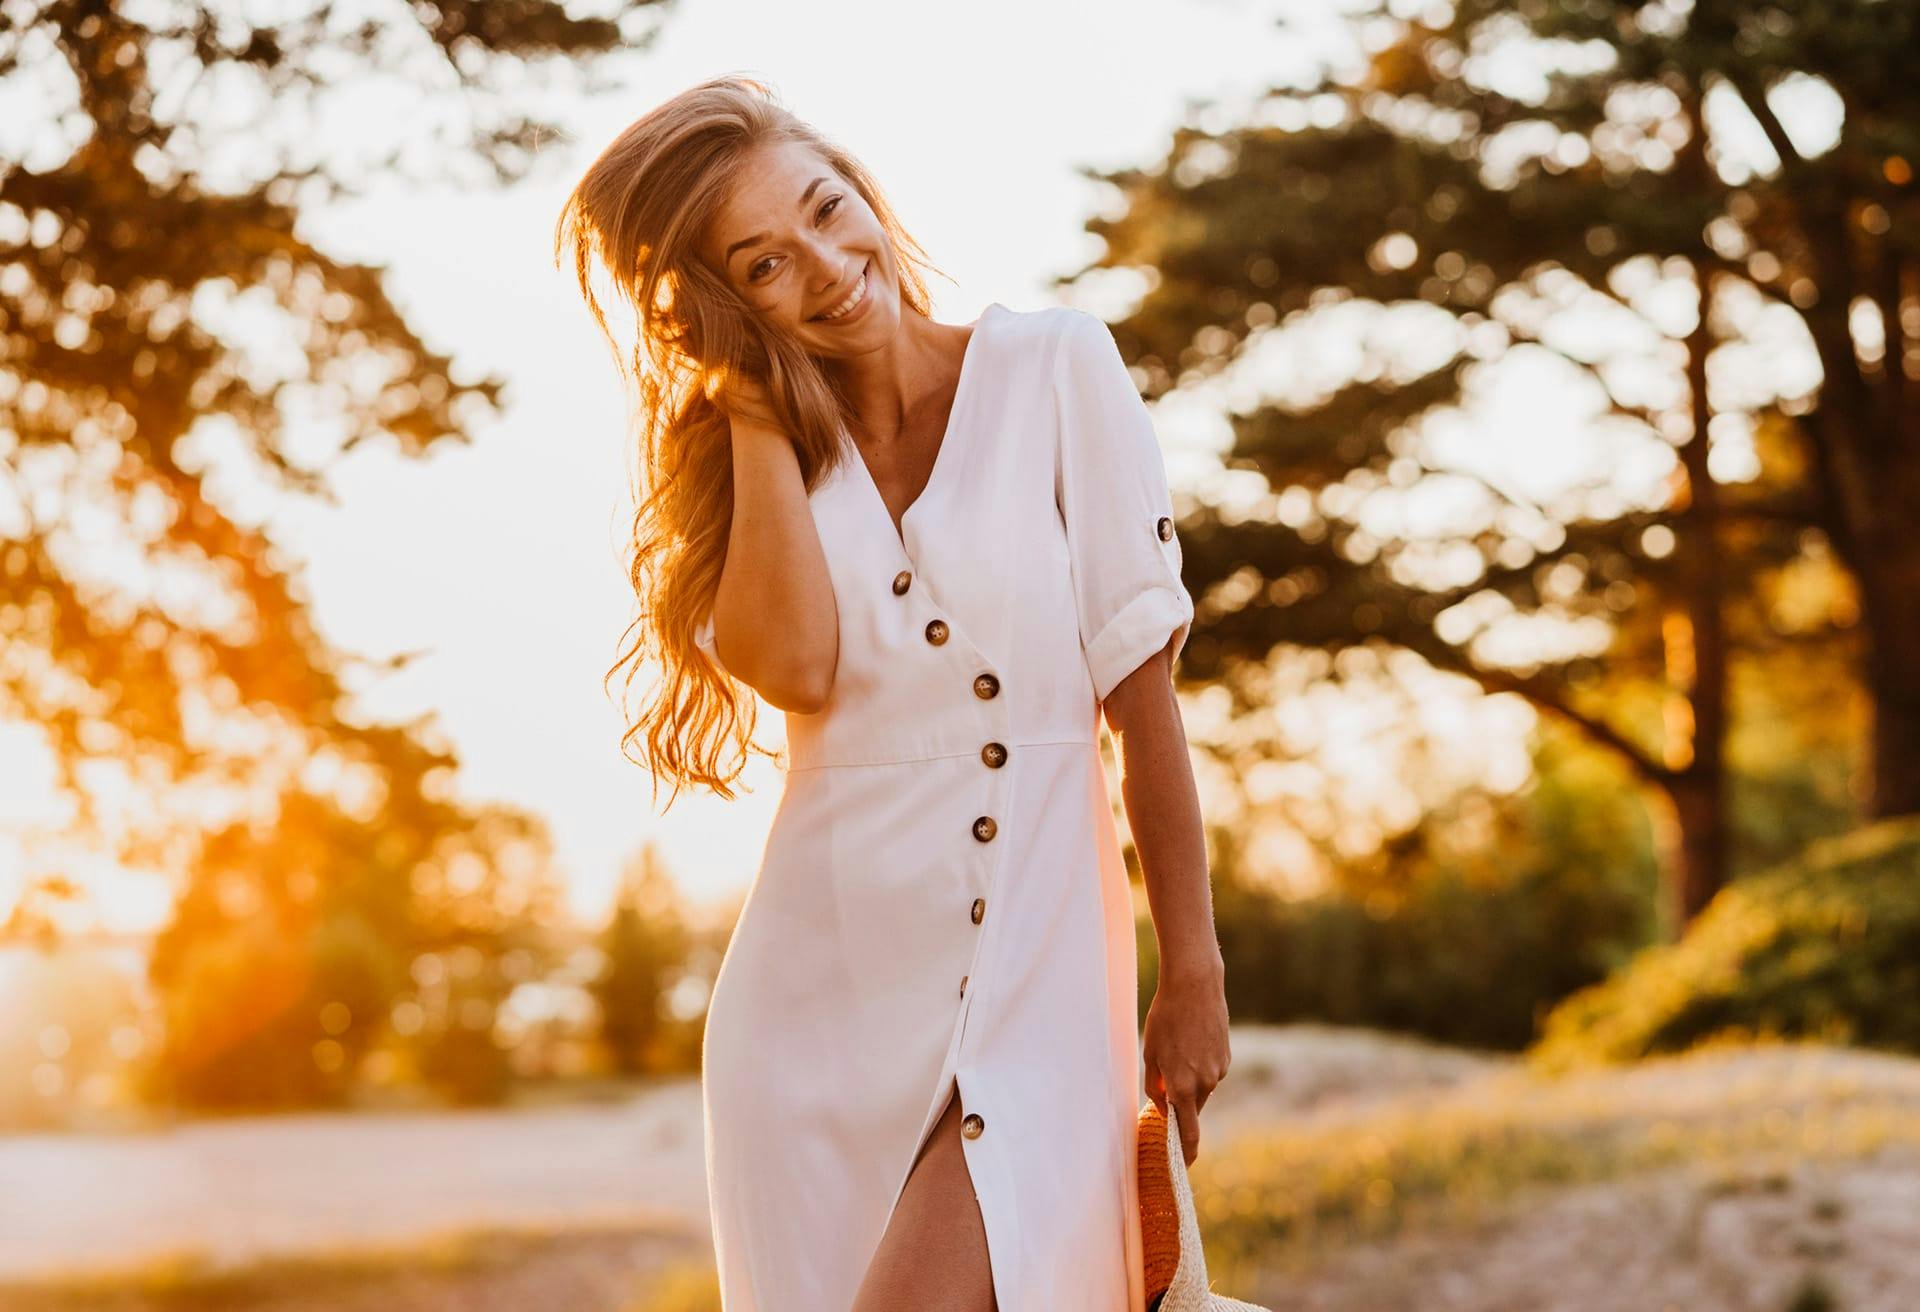 Woman in white button up dress smiling